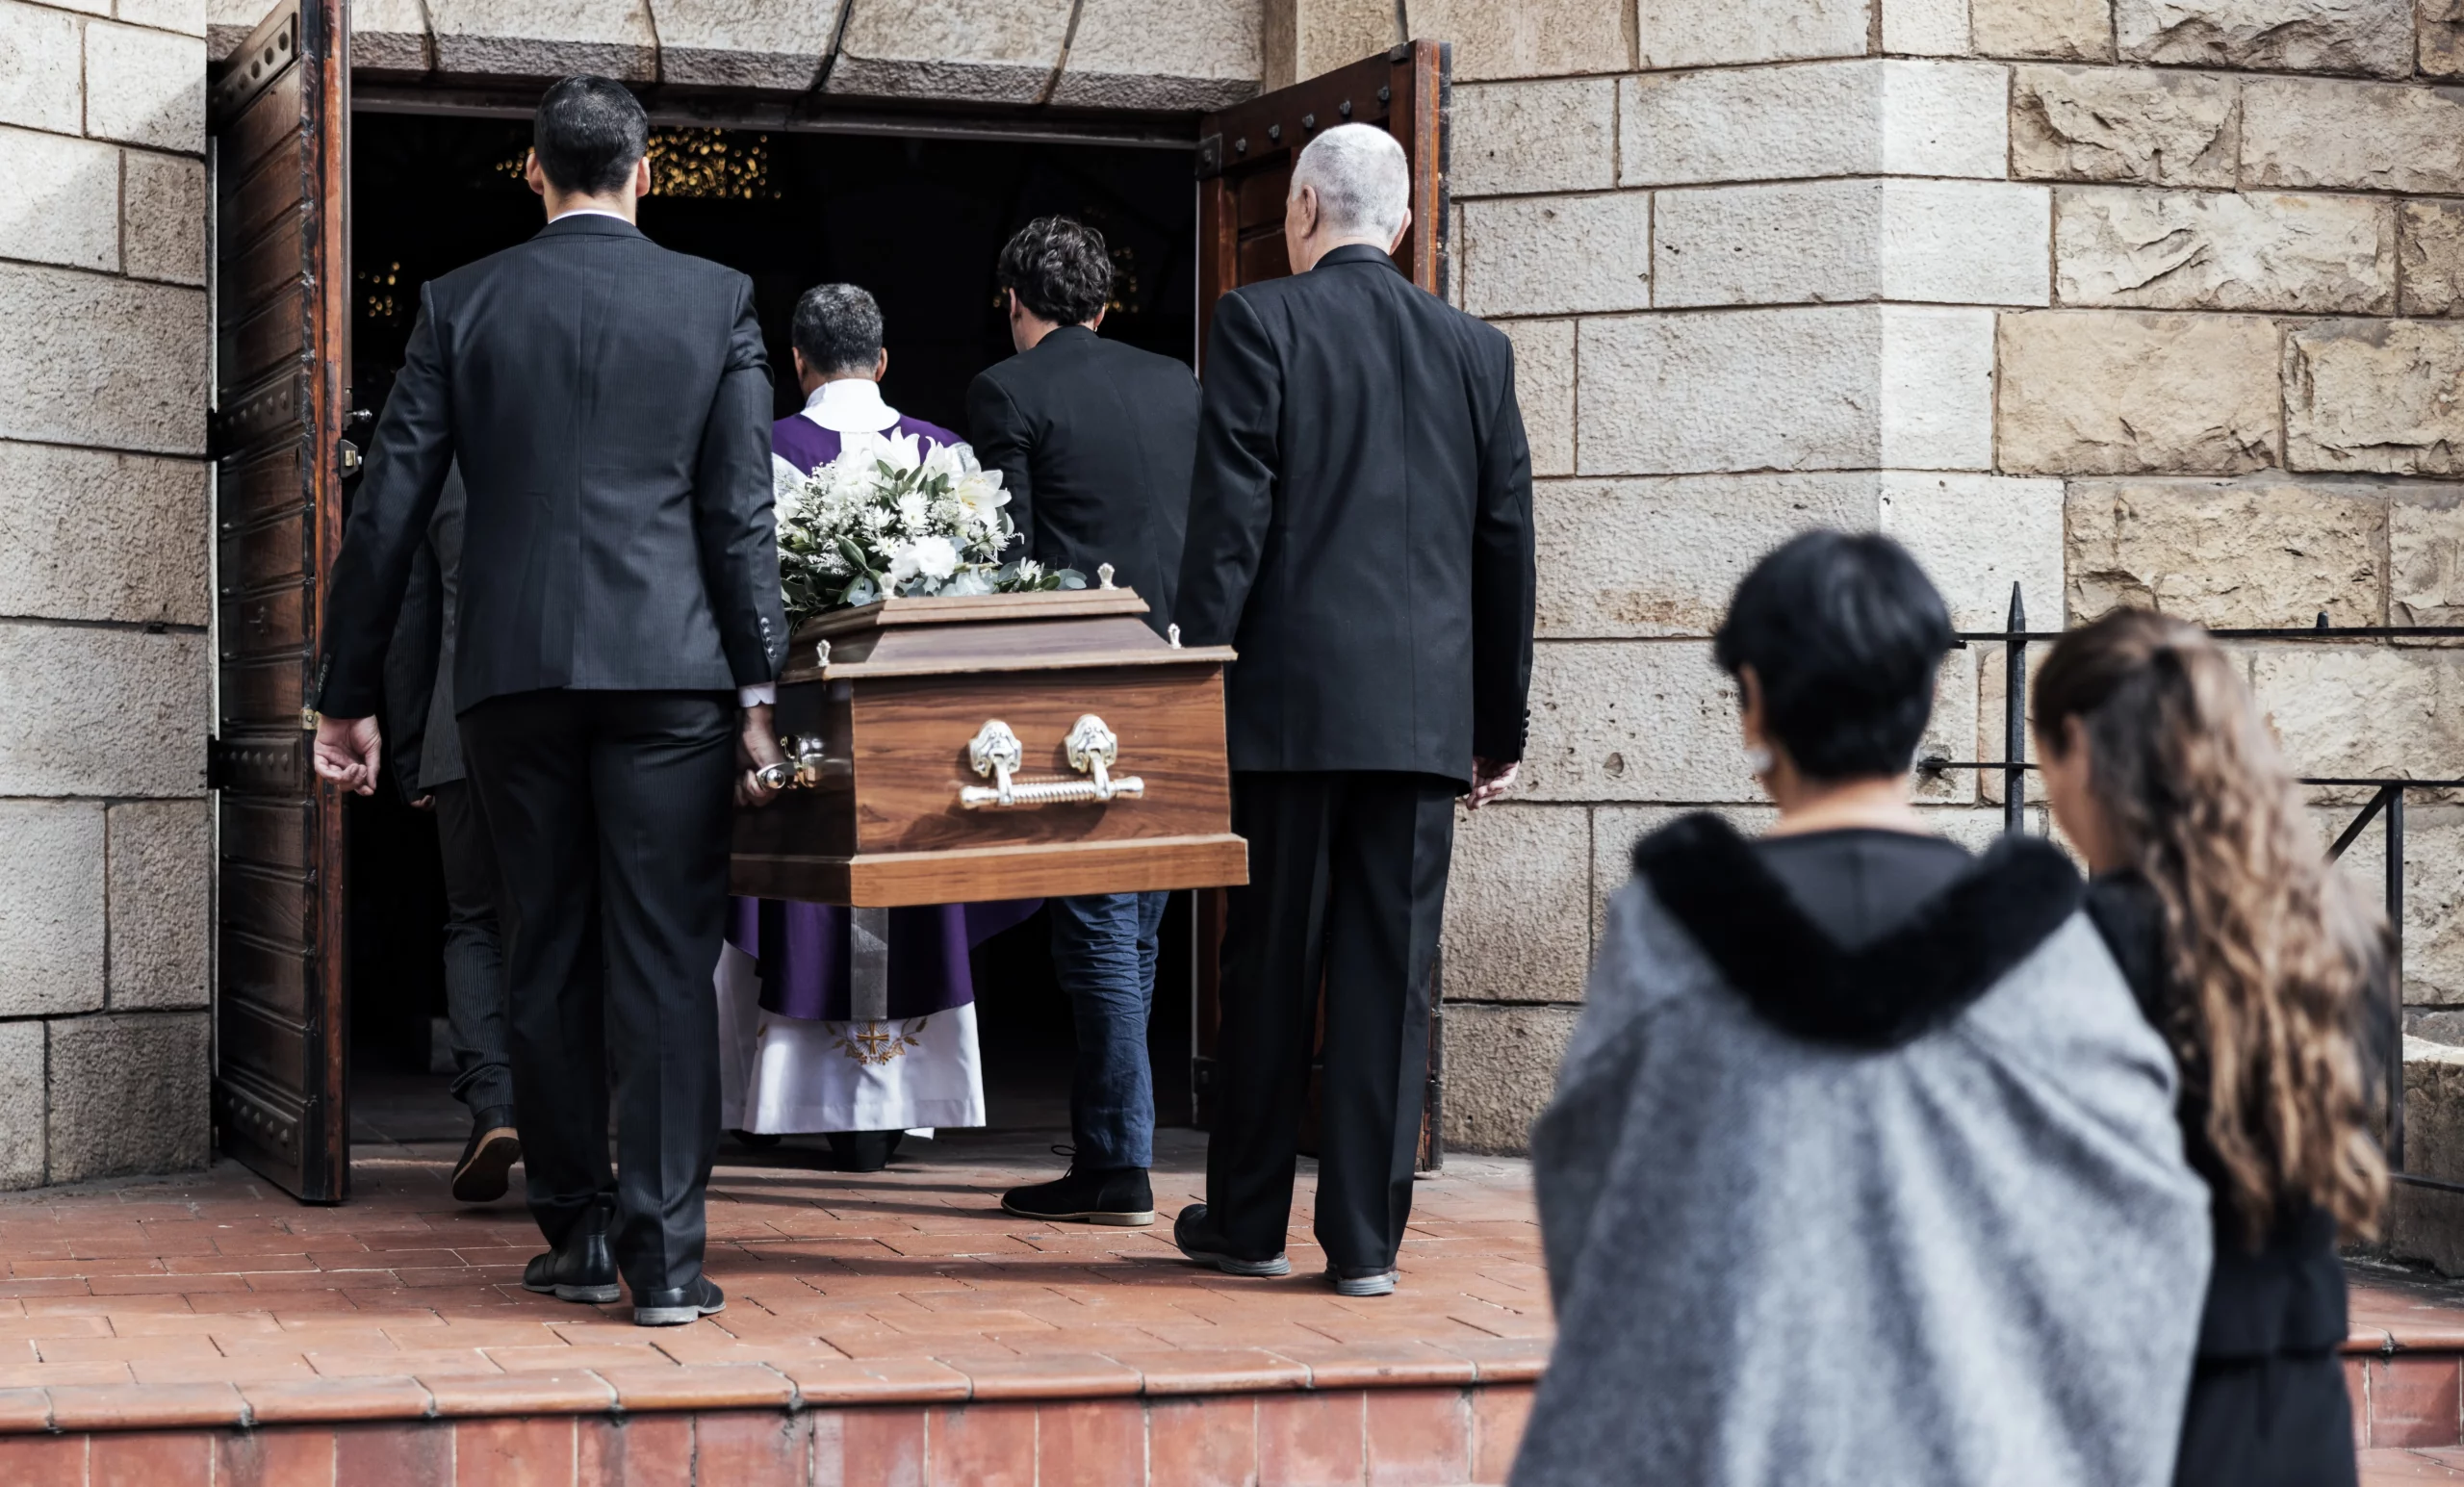 TRADITIONAL SERVICES FOLLOWED BY CREMATION